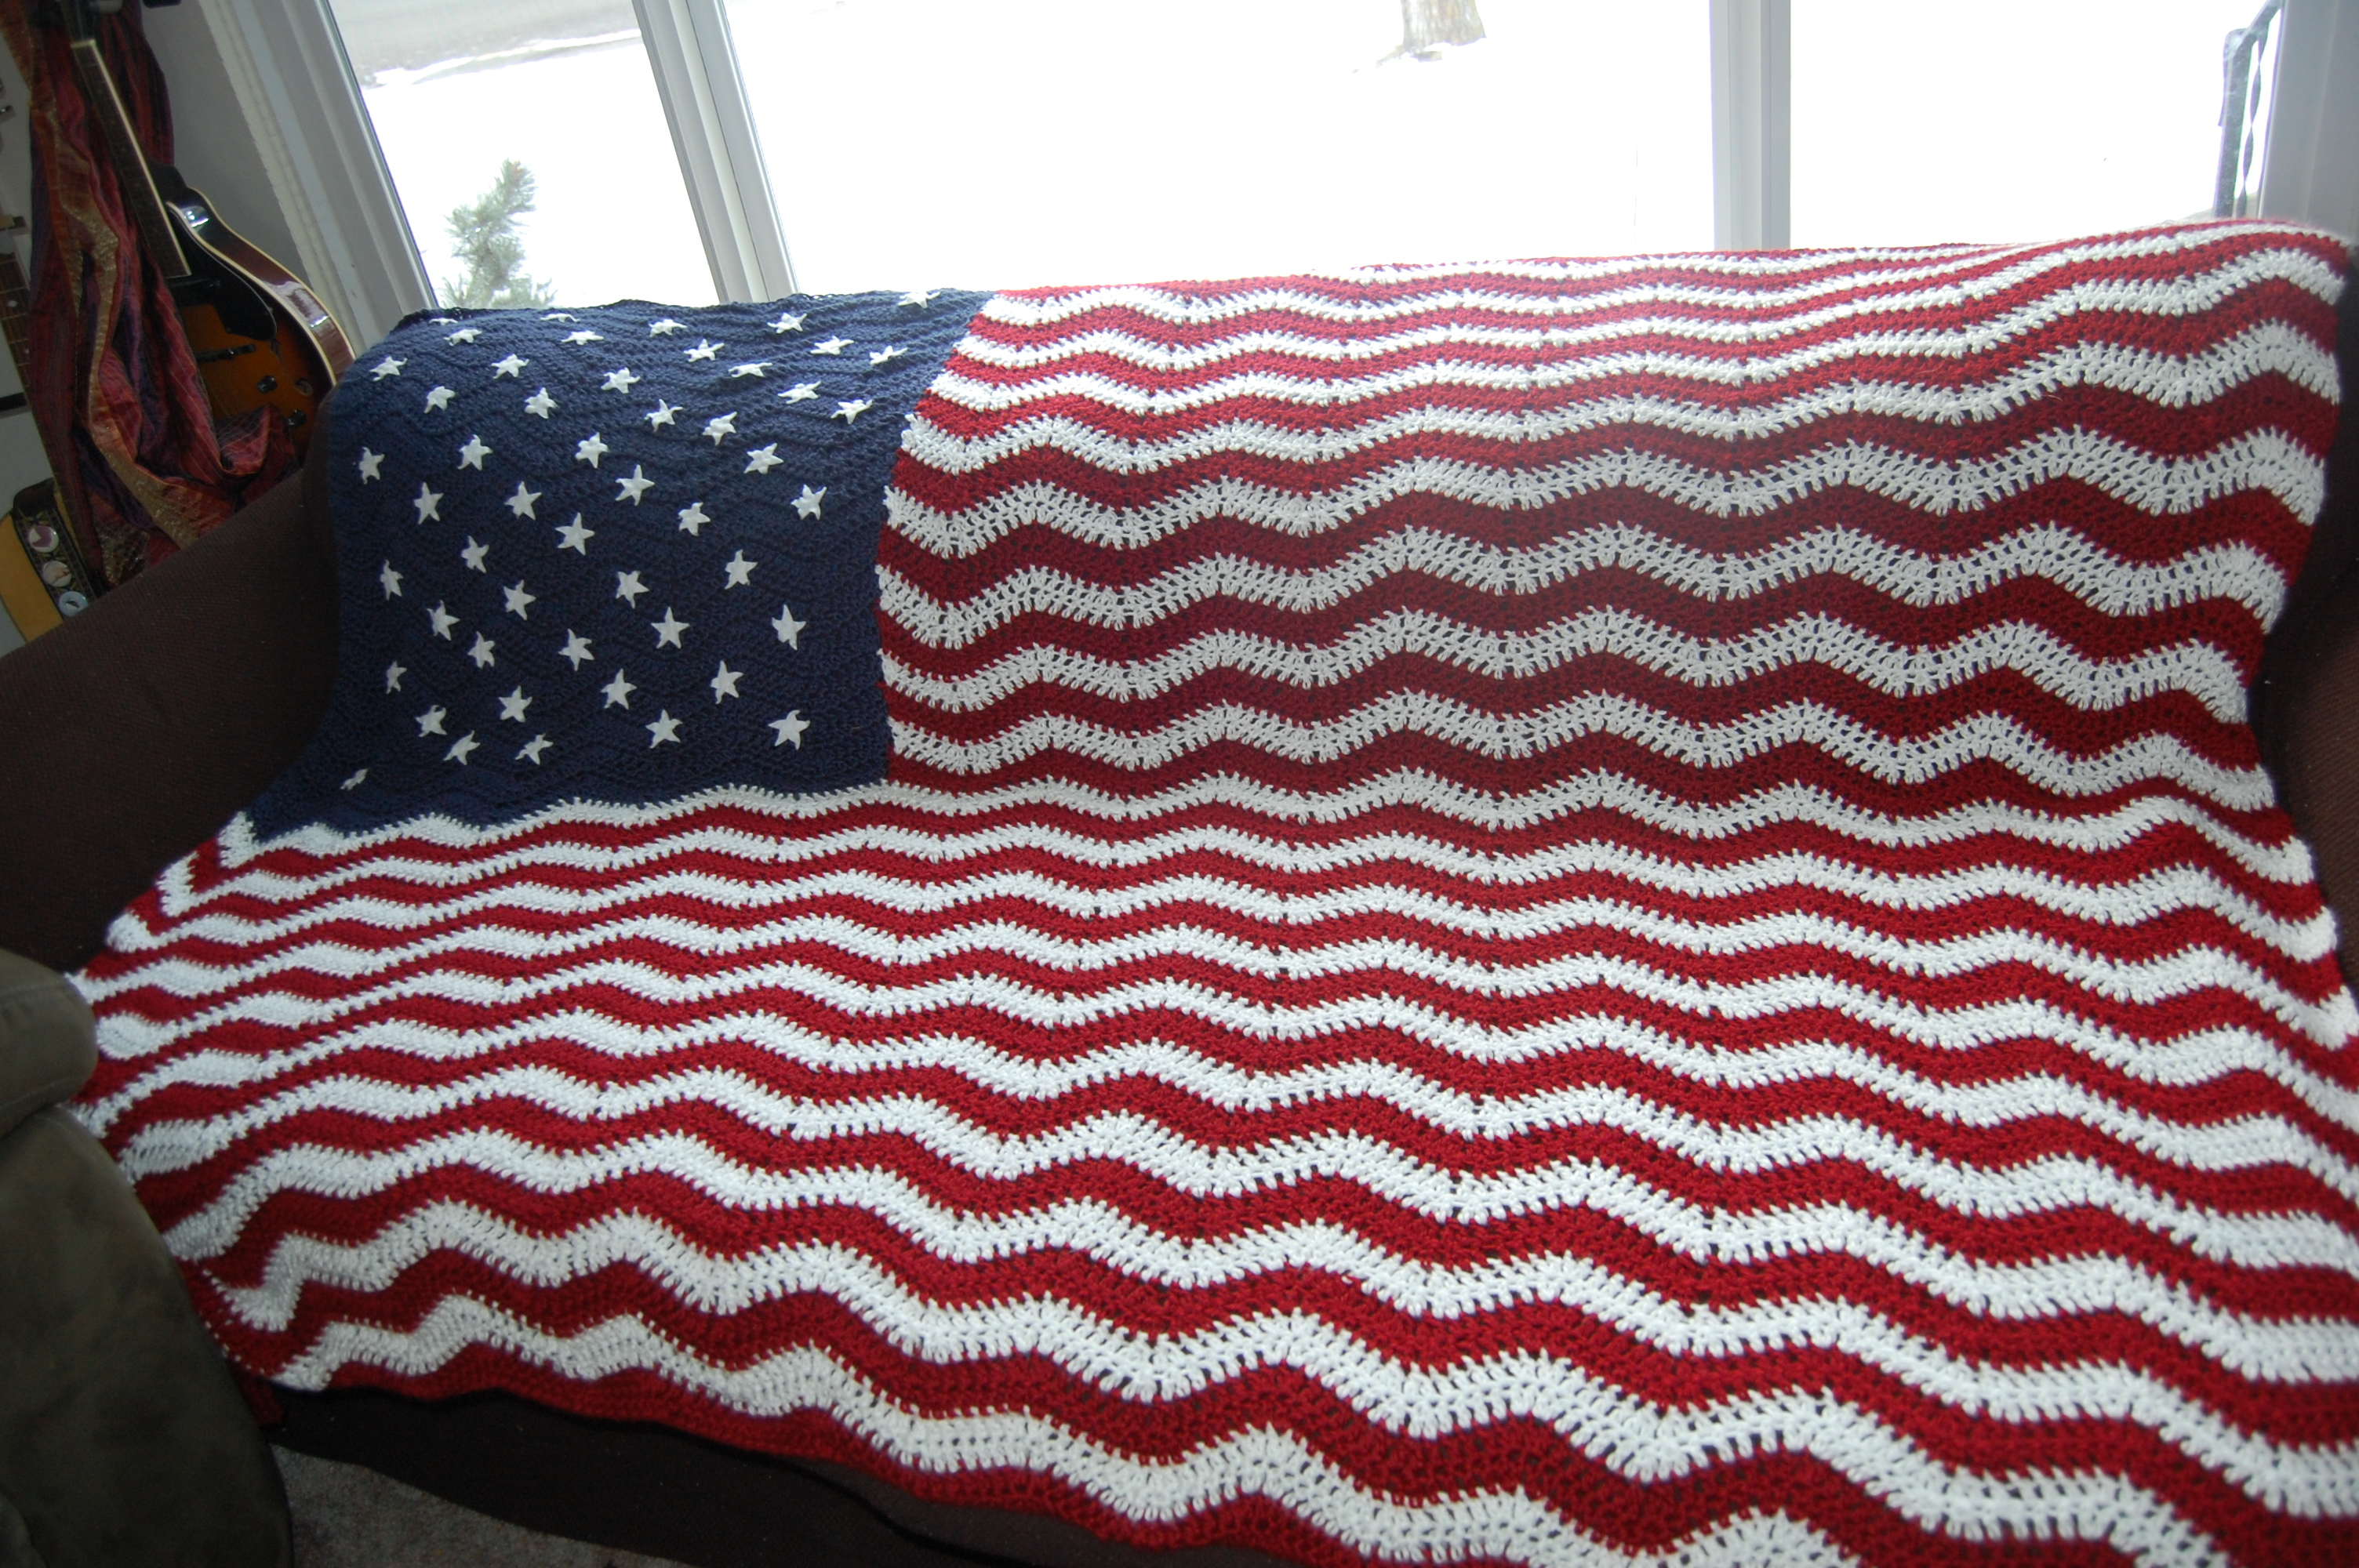 American Flag Crochet Pattern Every Heart Beats True For The Red White And Blue Knittybutton